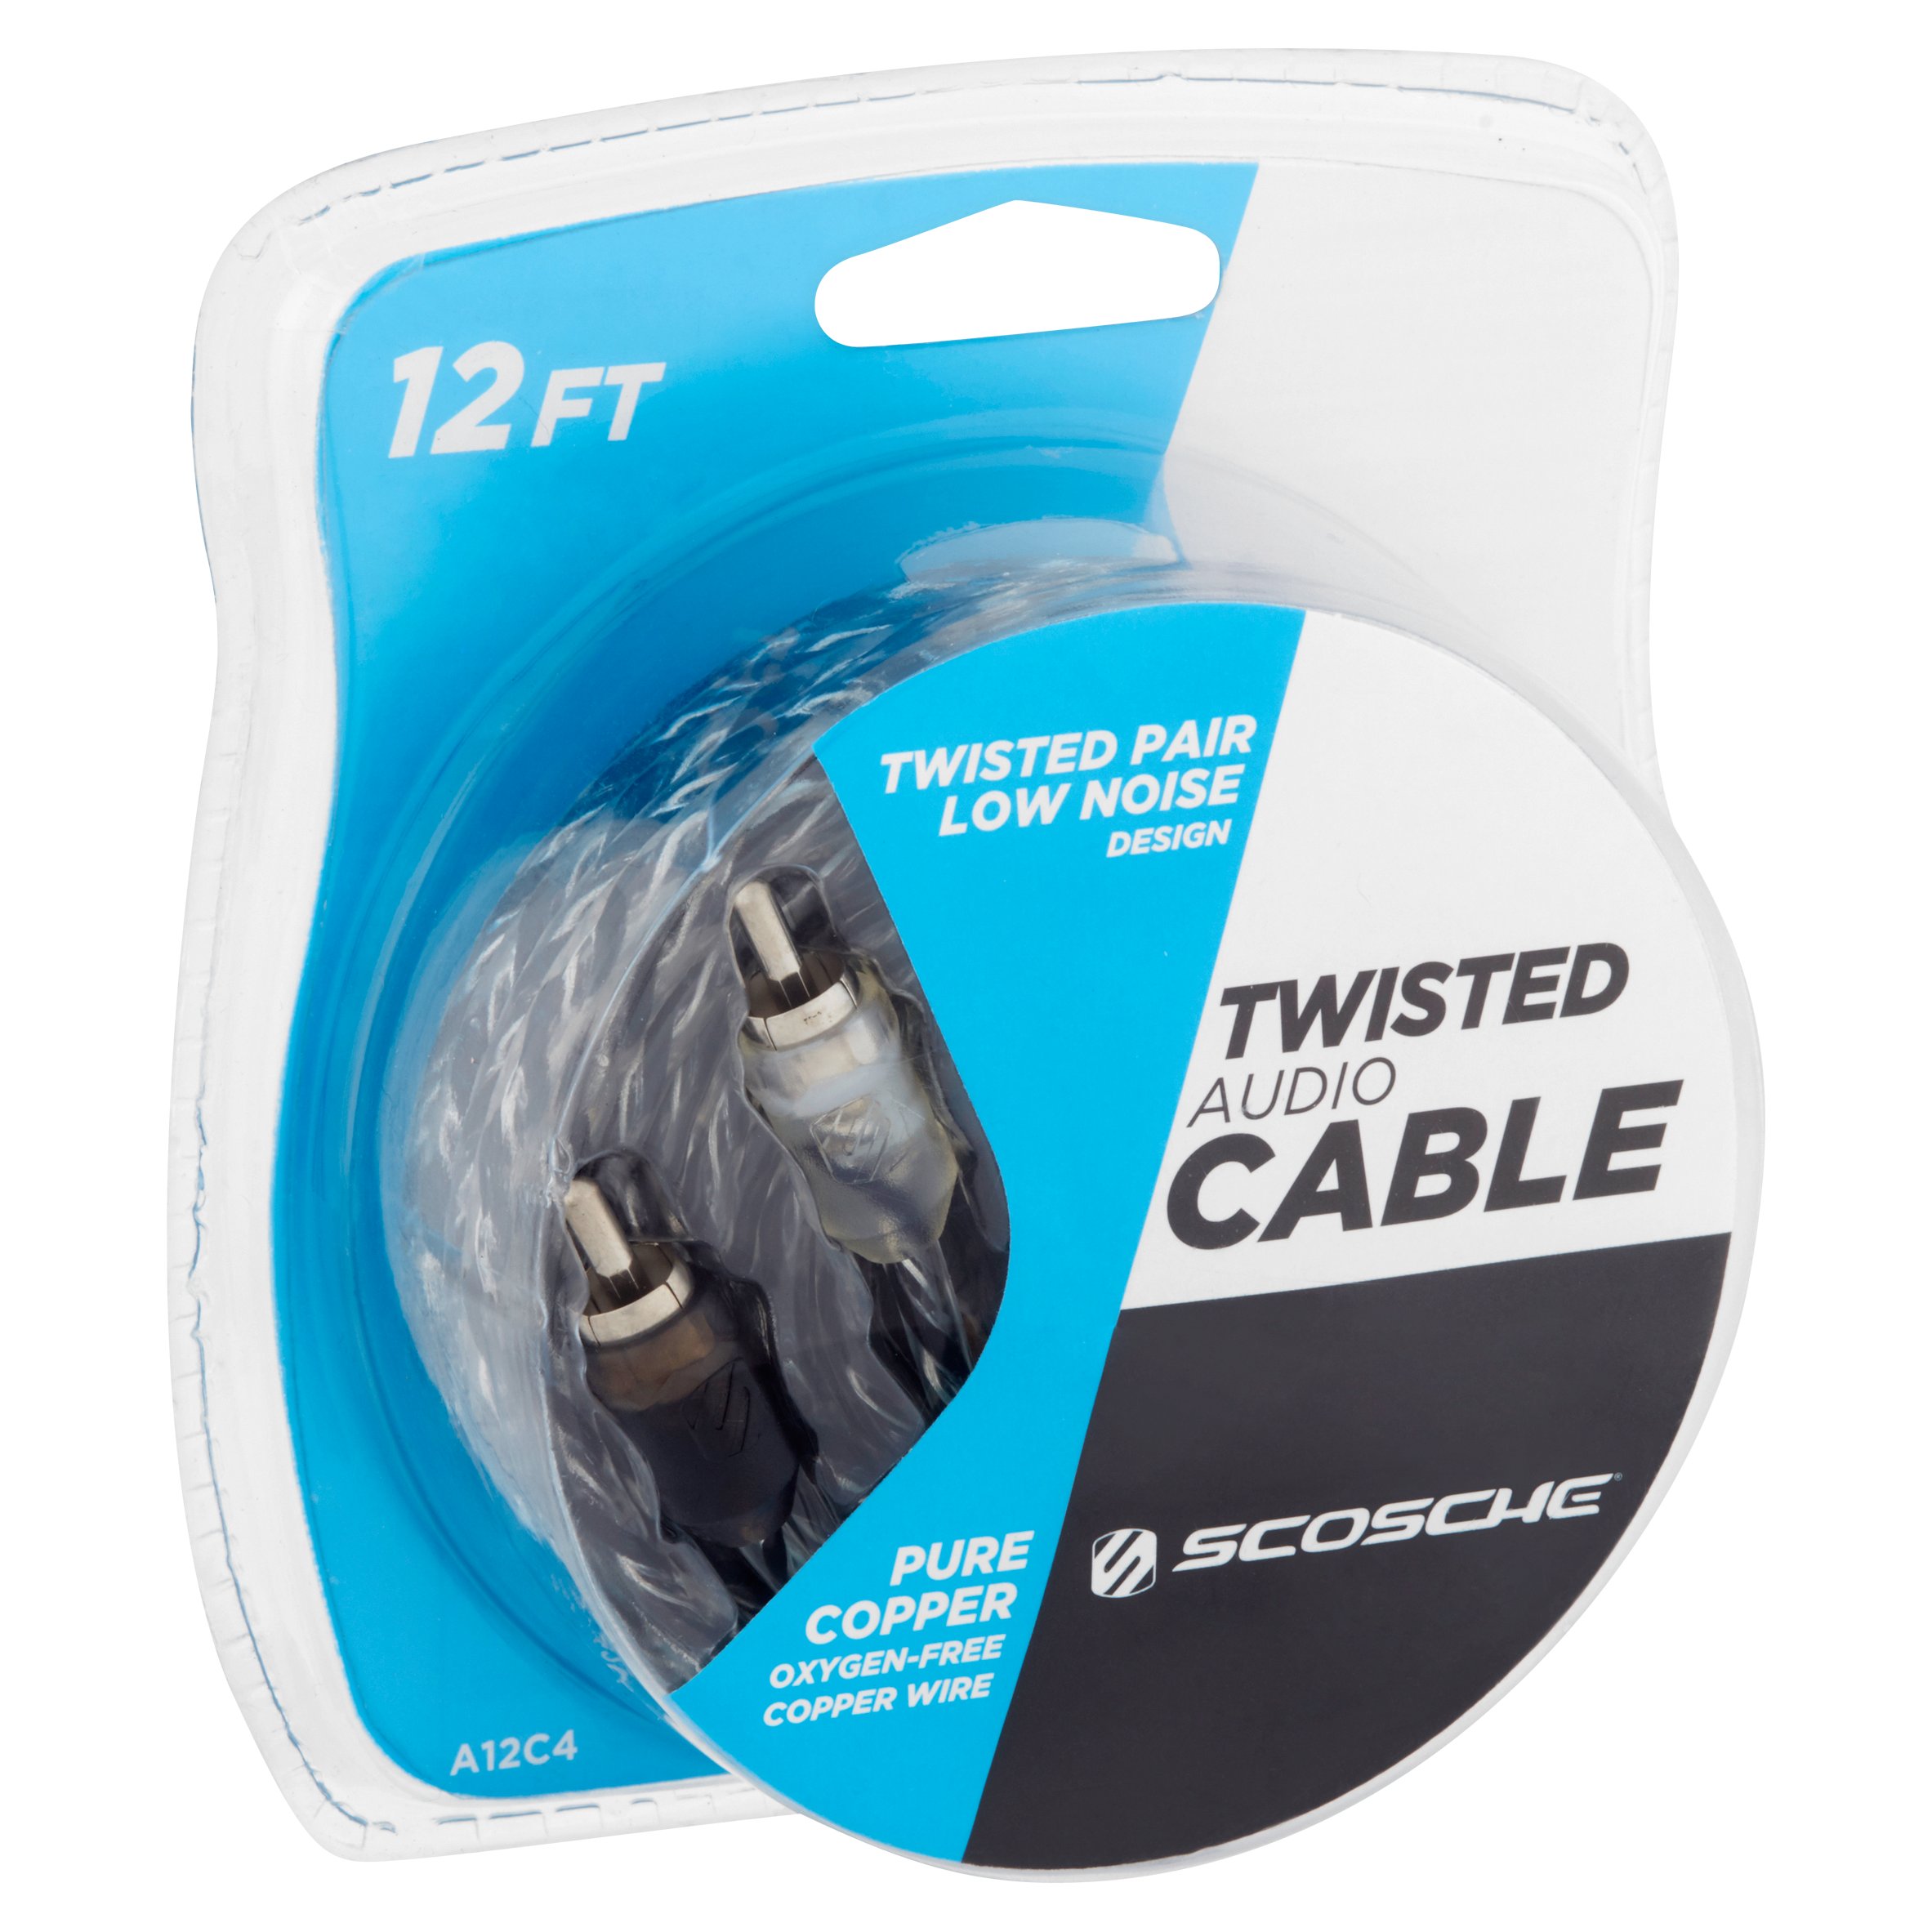 Scosche A12C4 - Twisted RCA Audio Cable (12 ft.) - image 5 of 6